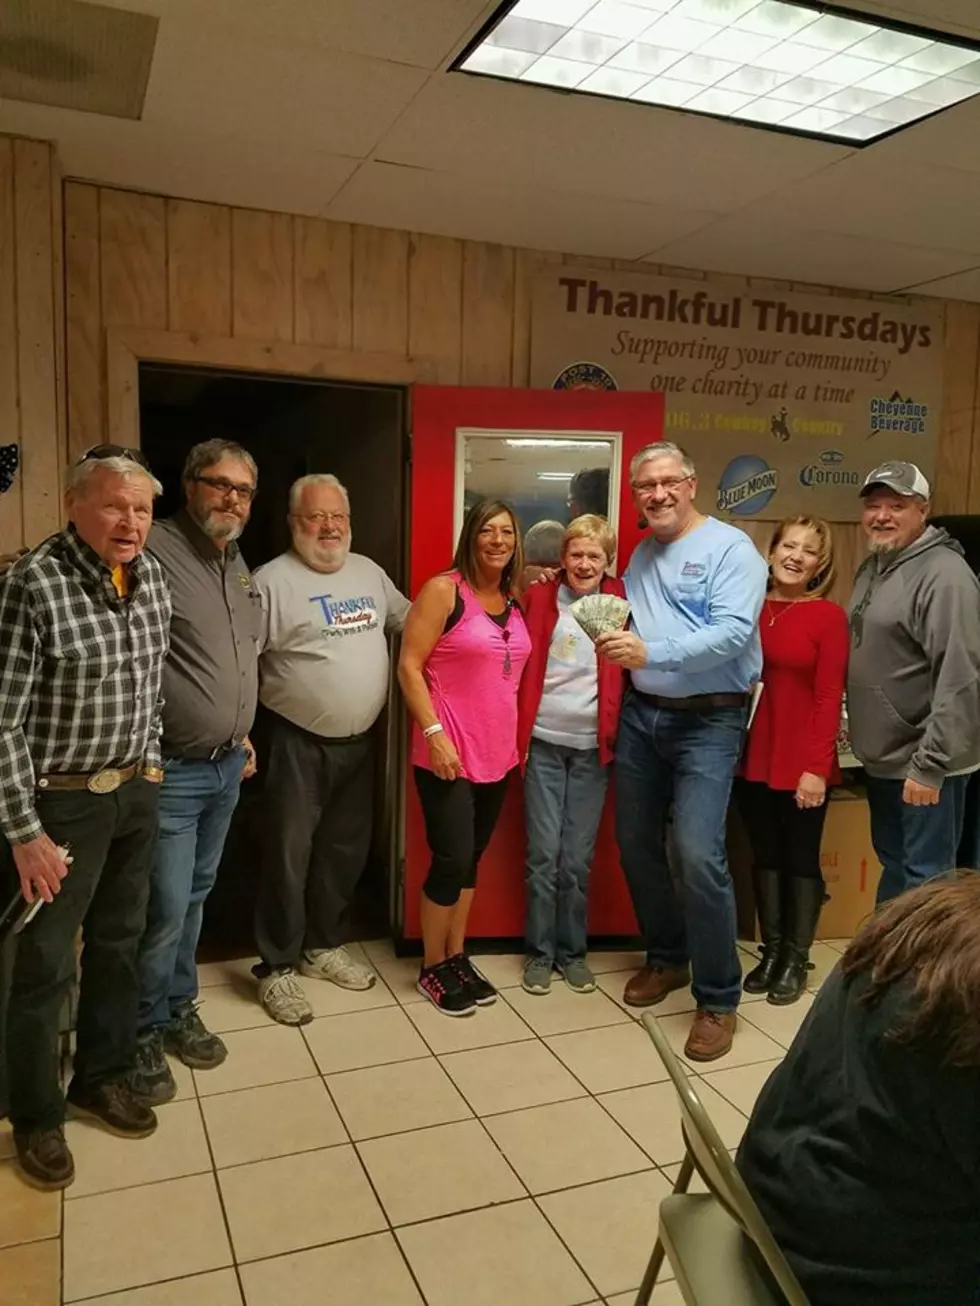 Thankful Thursday Gives Away Over $2,000, Raises Over $10,000 For Safe Harbor